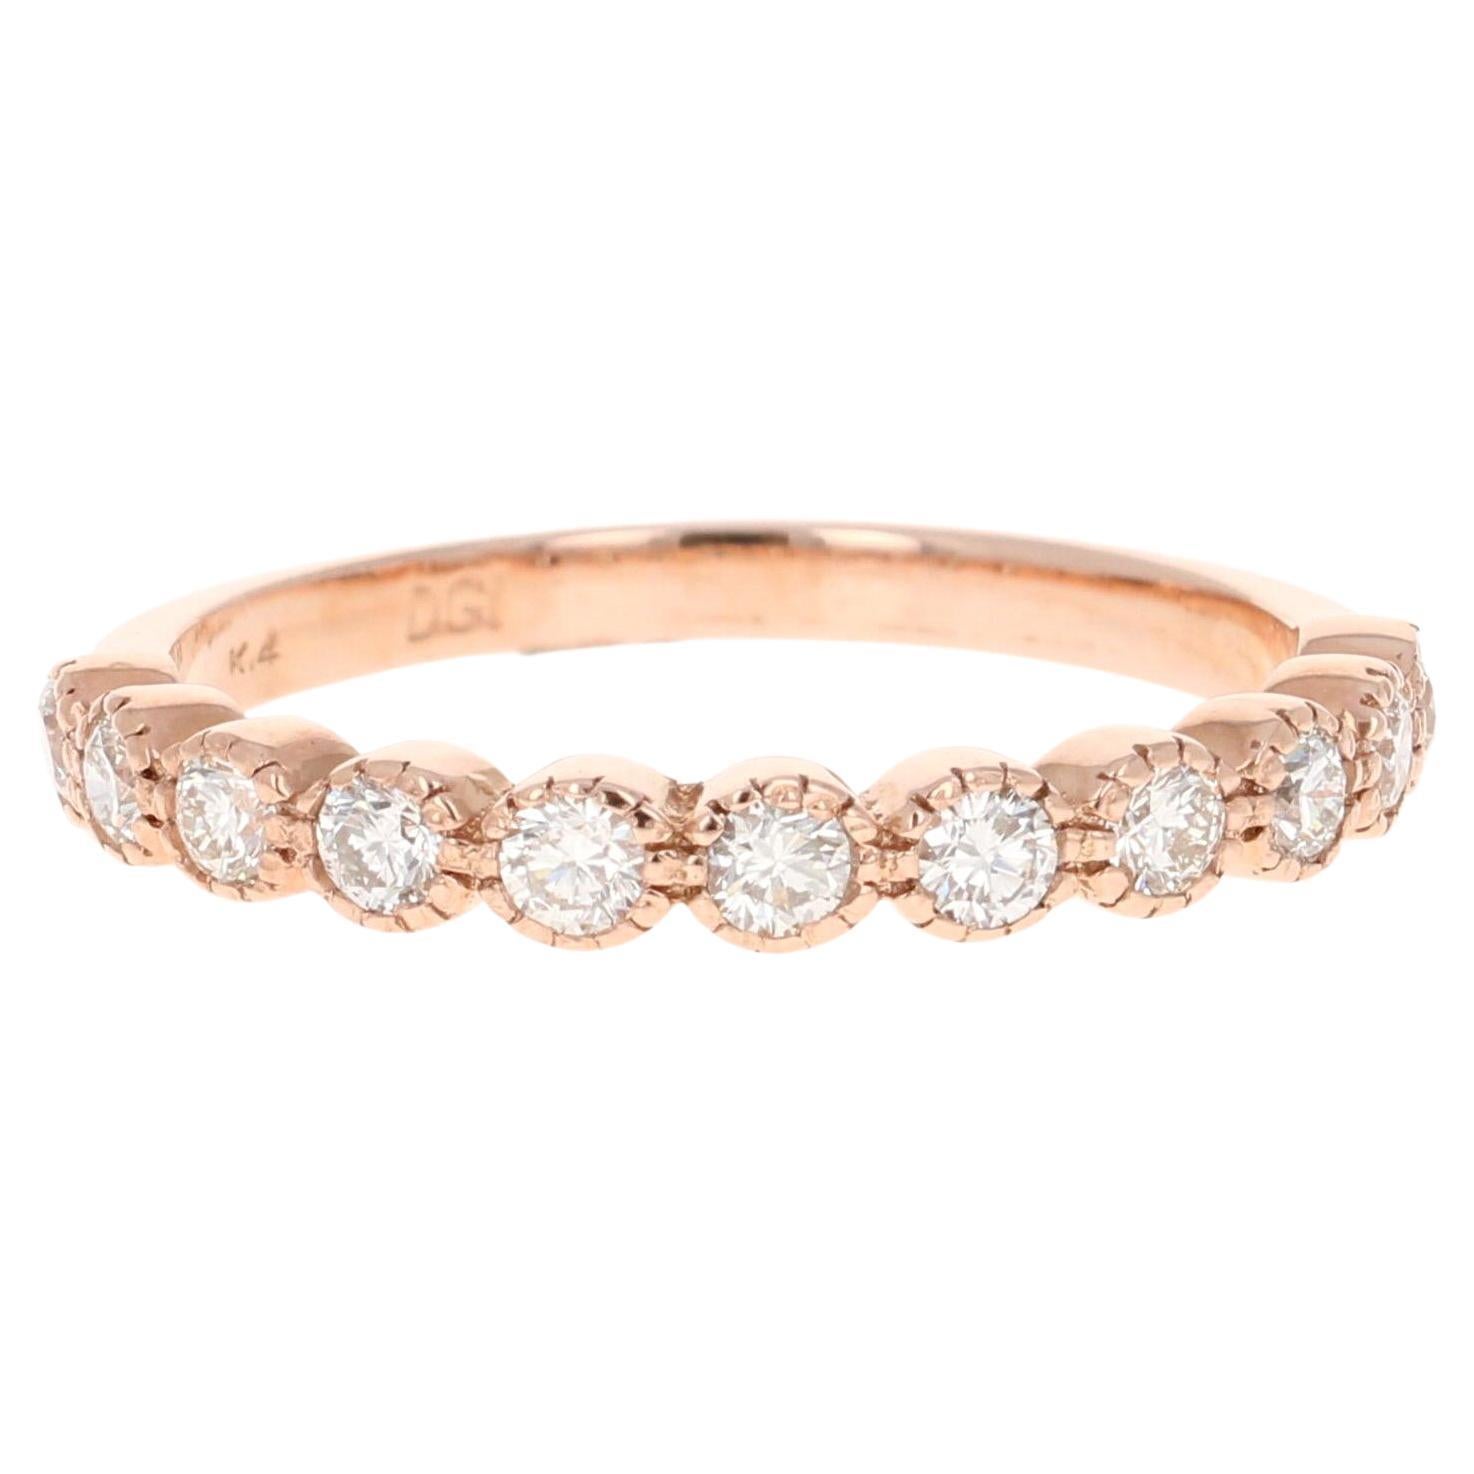 0.44 Carat Round Cut Diamond Rose Gold Band For Sale